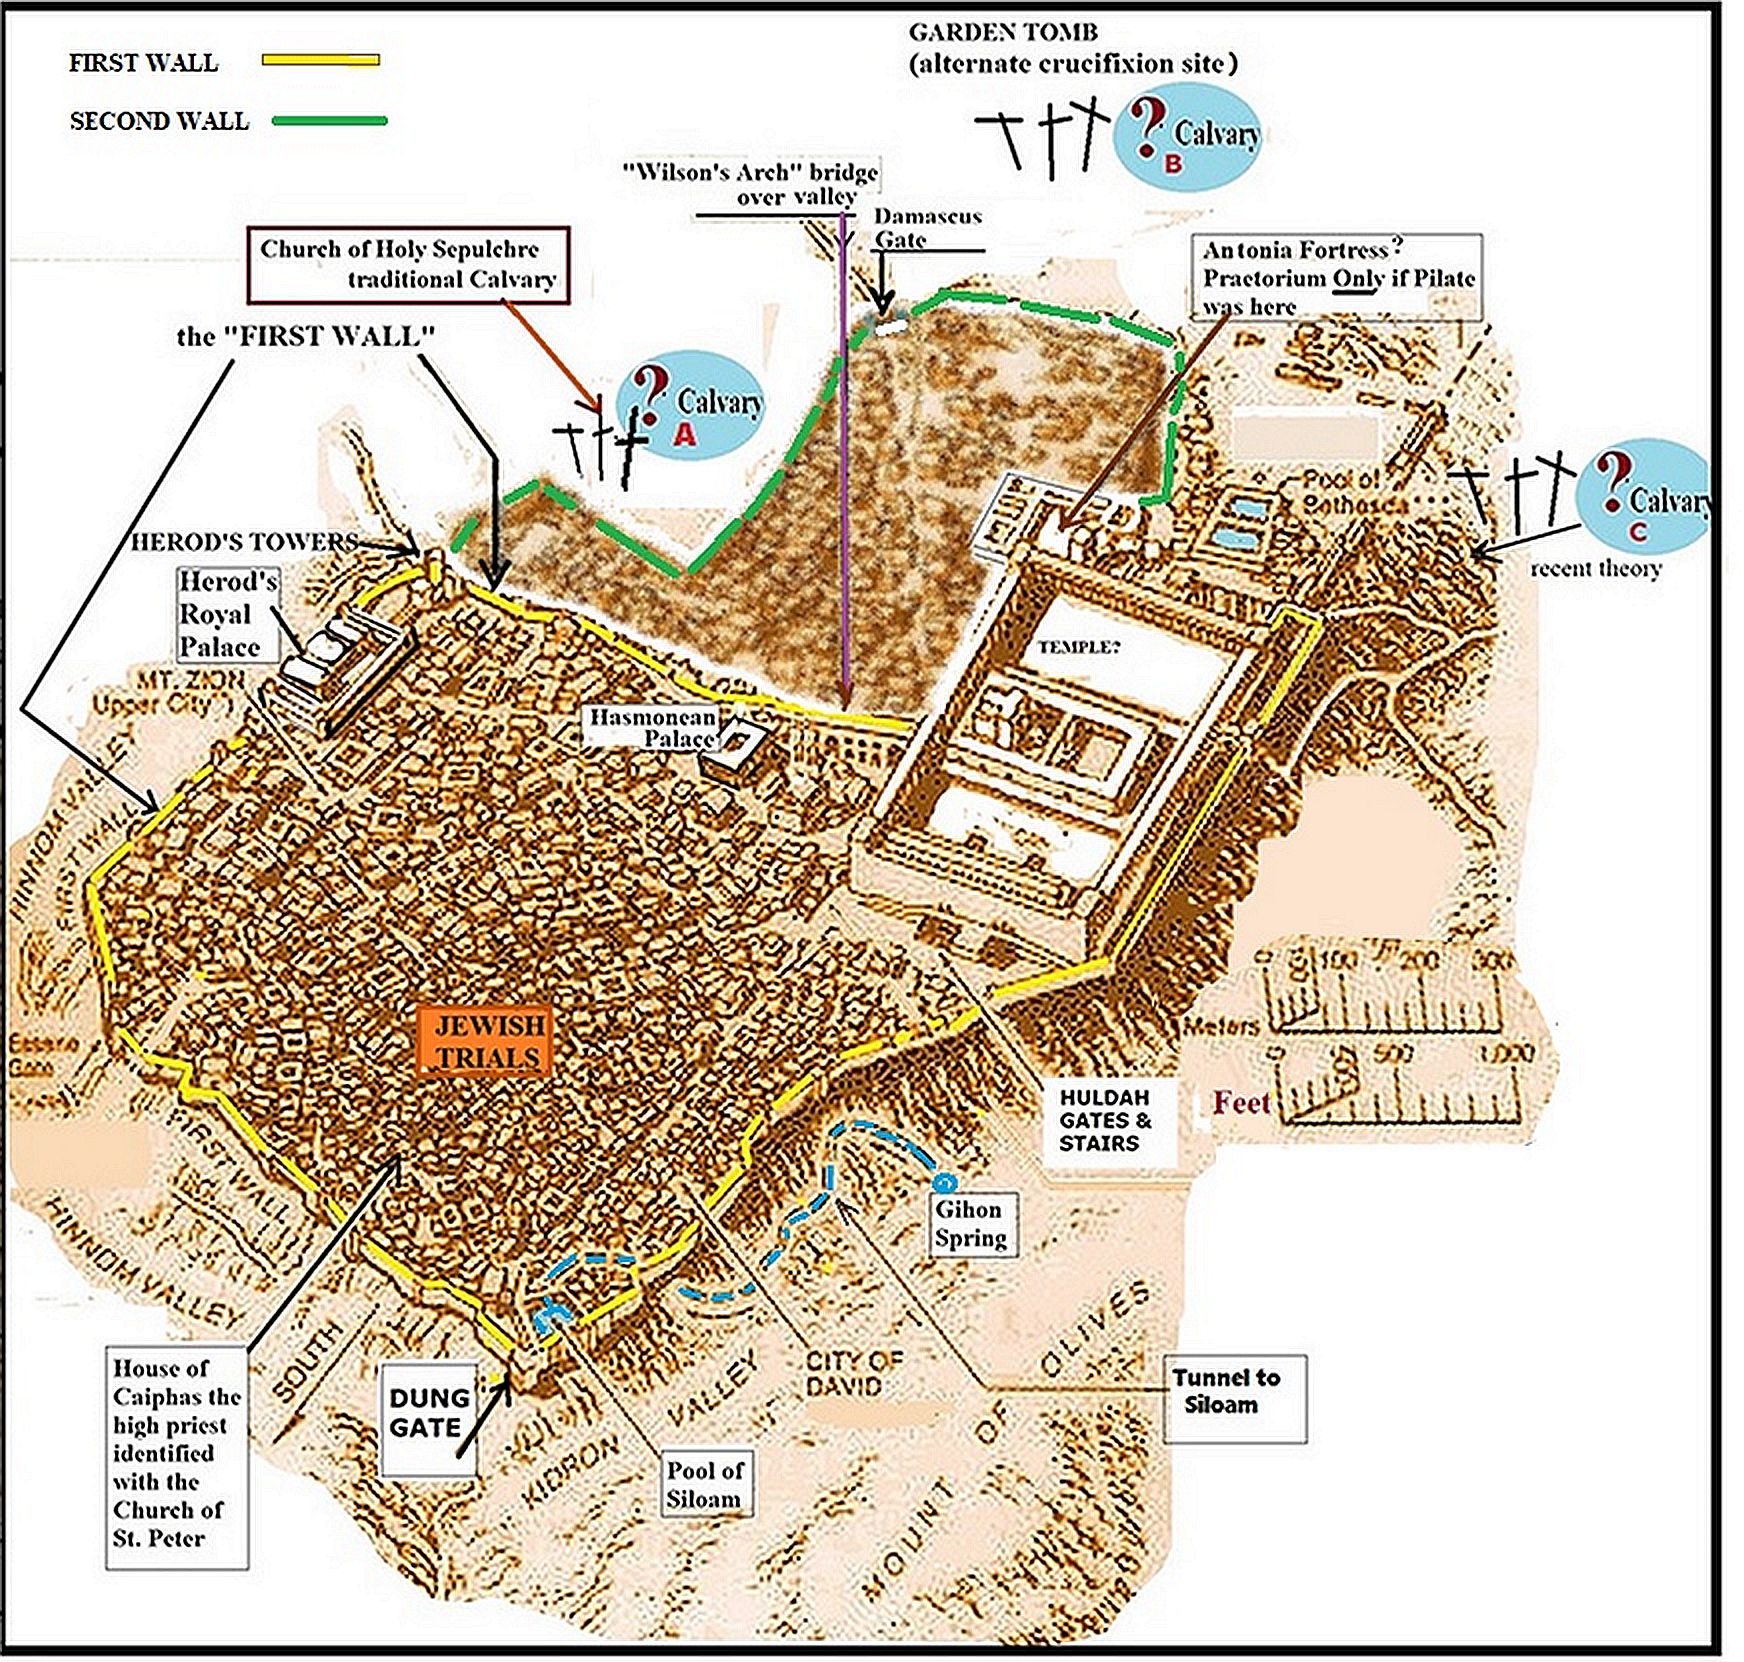 Jerusalem map with two walls; position of crosses